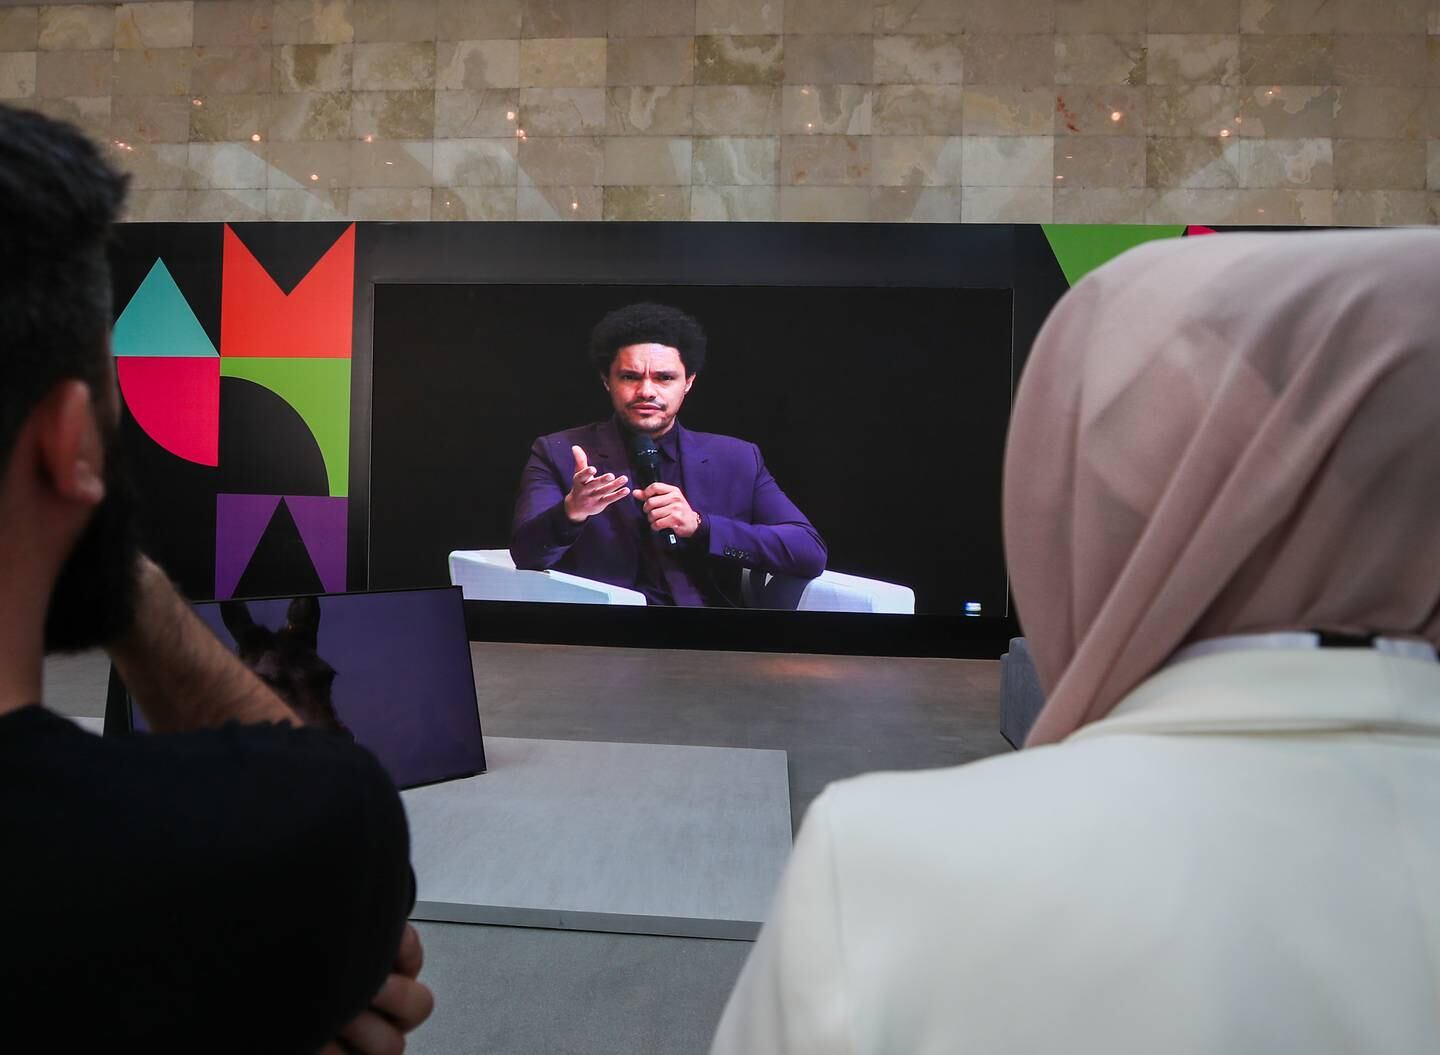 The audience watches a keynote conversation with Trevor Noah on the screen at Culture Summit Abu Dhabi. Victor Besa / The National